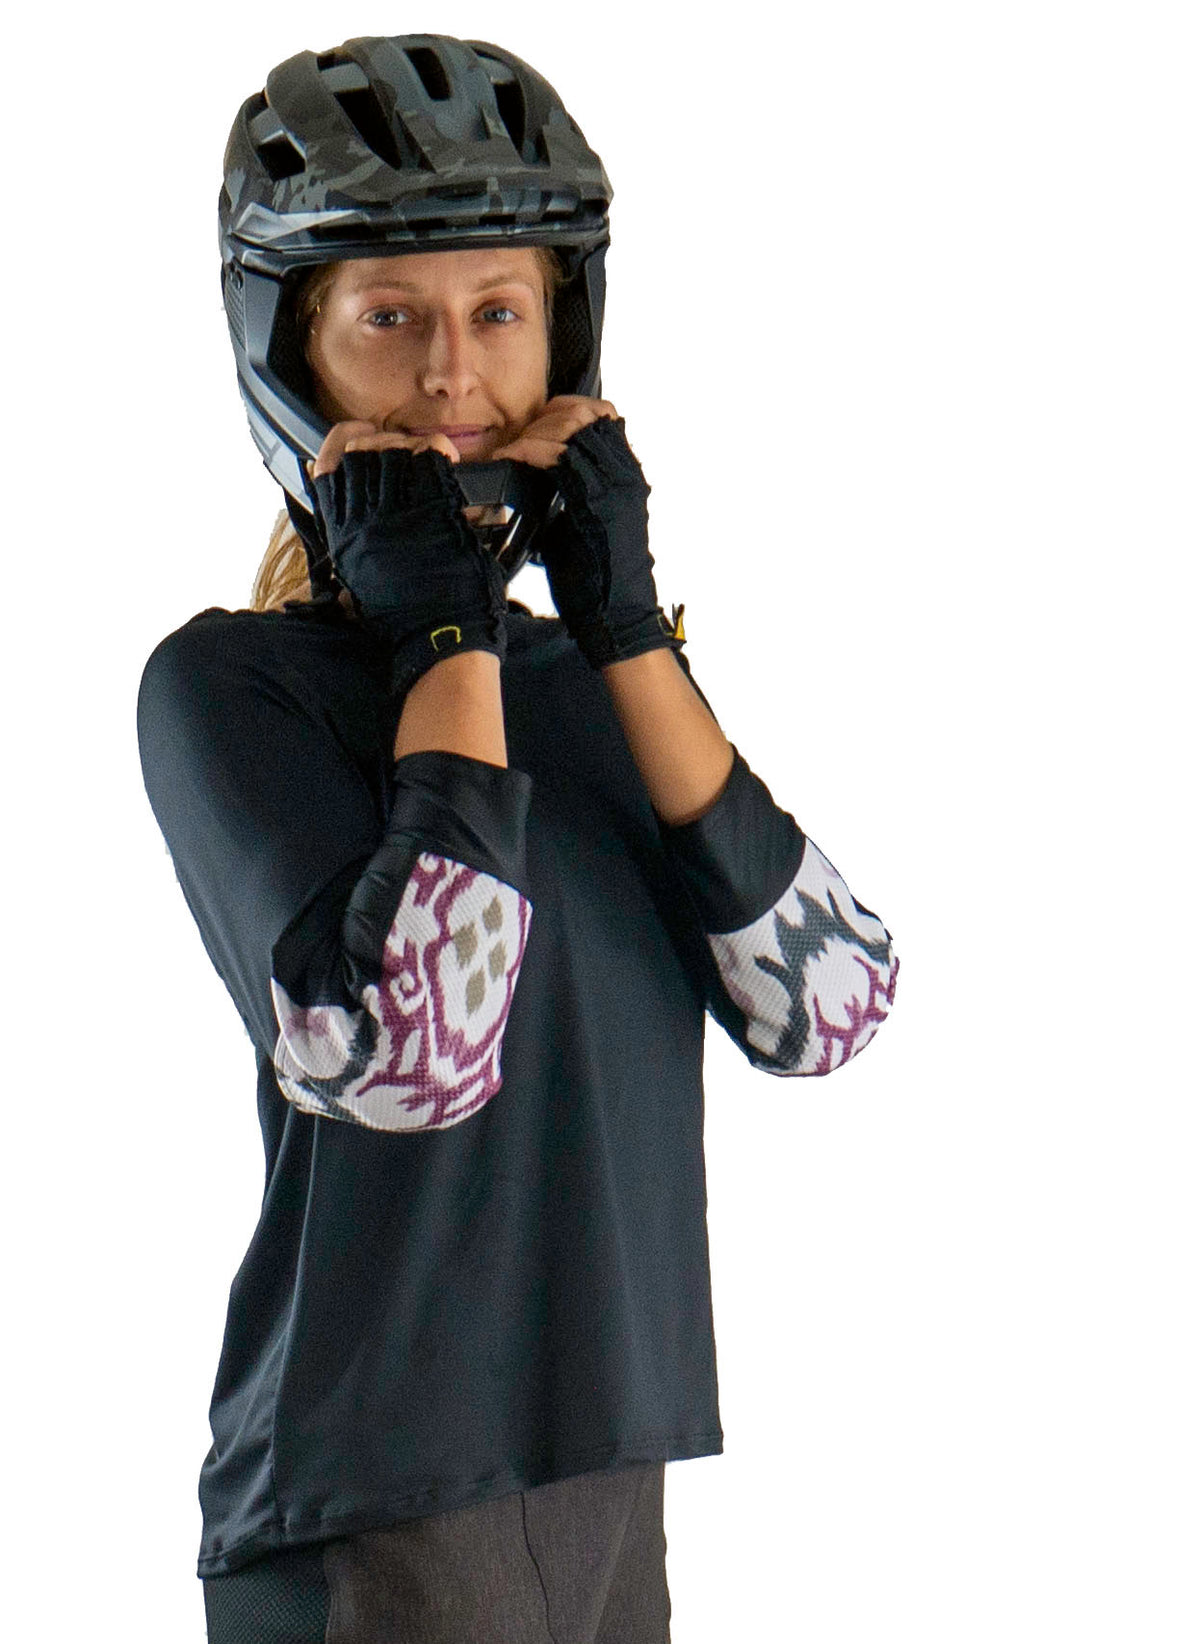 DROP IN MTB JERSEY STYLED ELBOWS - Moxie Cycling